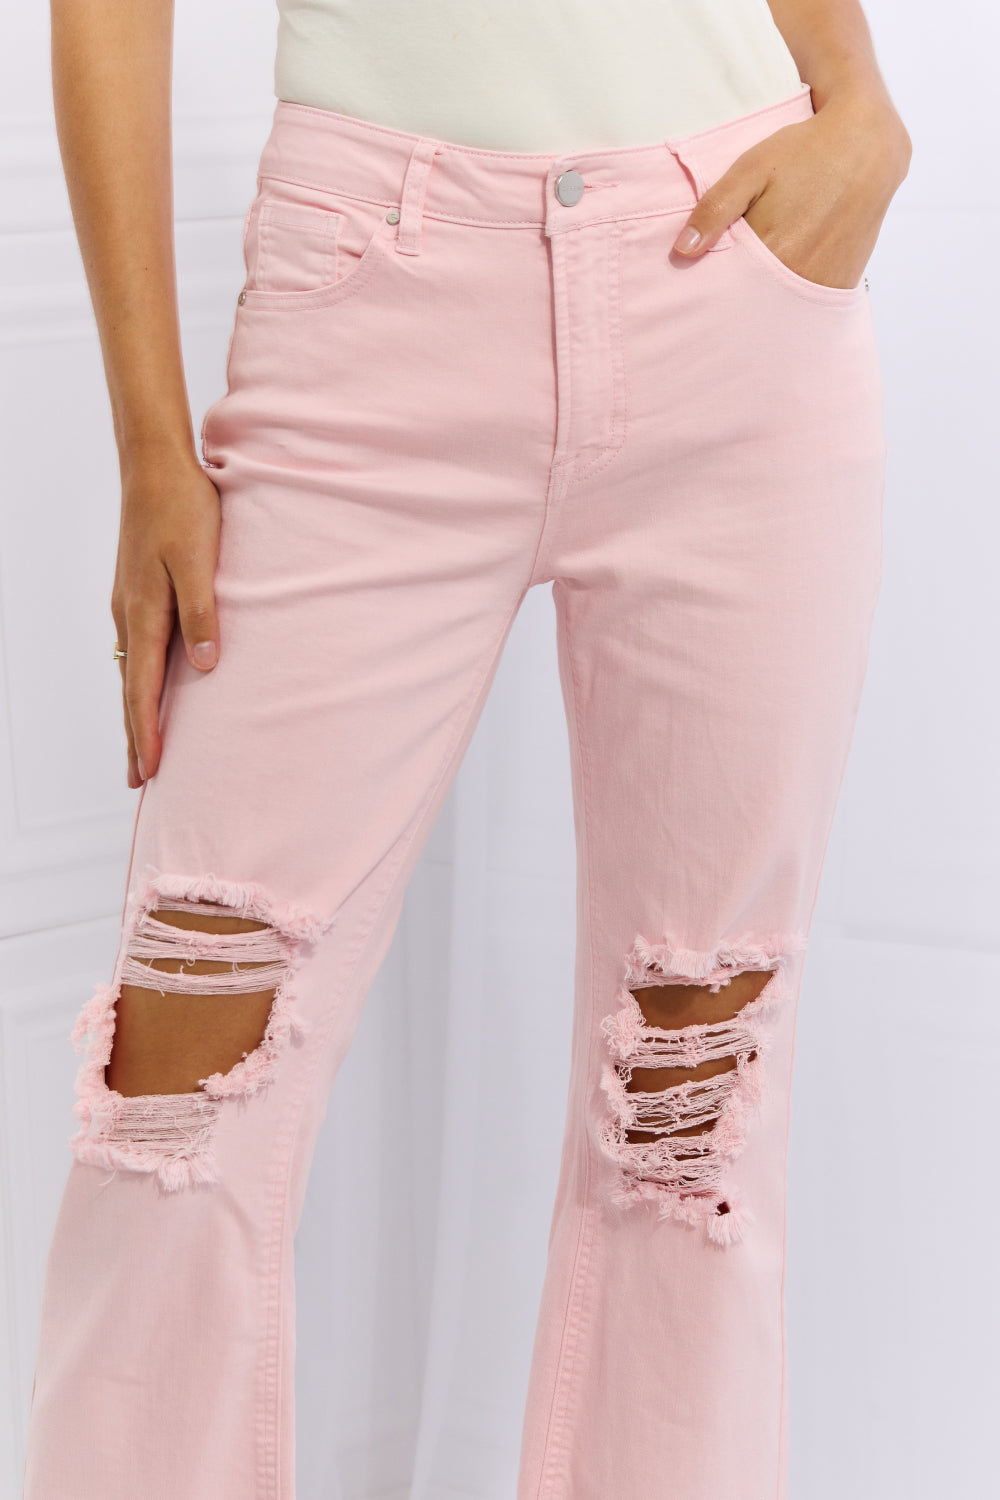 RISEN Miley Full Size Distressed Ankle Flare Jeans | CLOTHING,SHOES & ACCESSORIES | pants, RISEN, Ship from USA, Women's Apparel, women's clothing, women's fashion | Trendsi